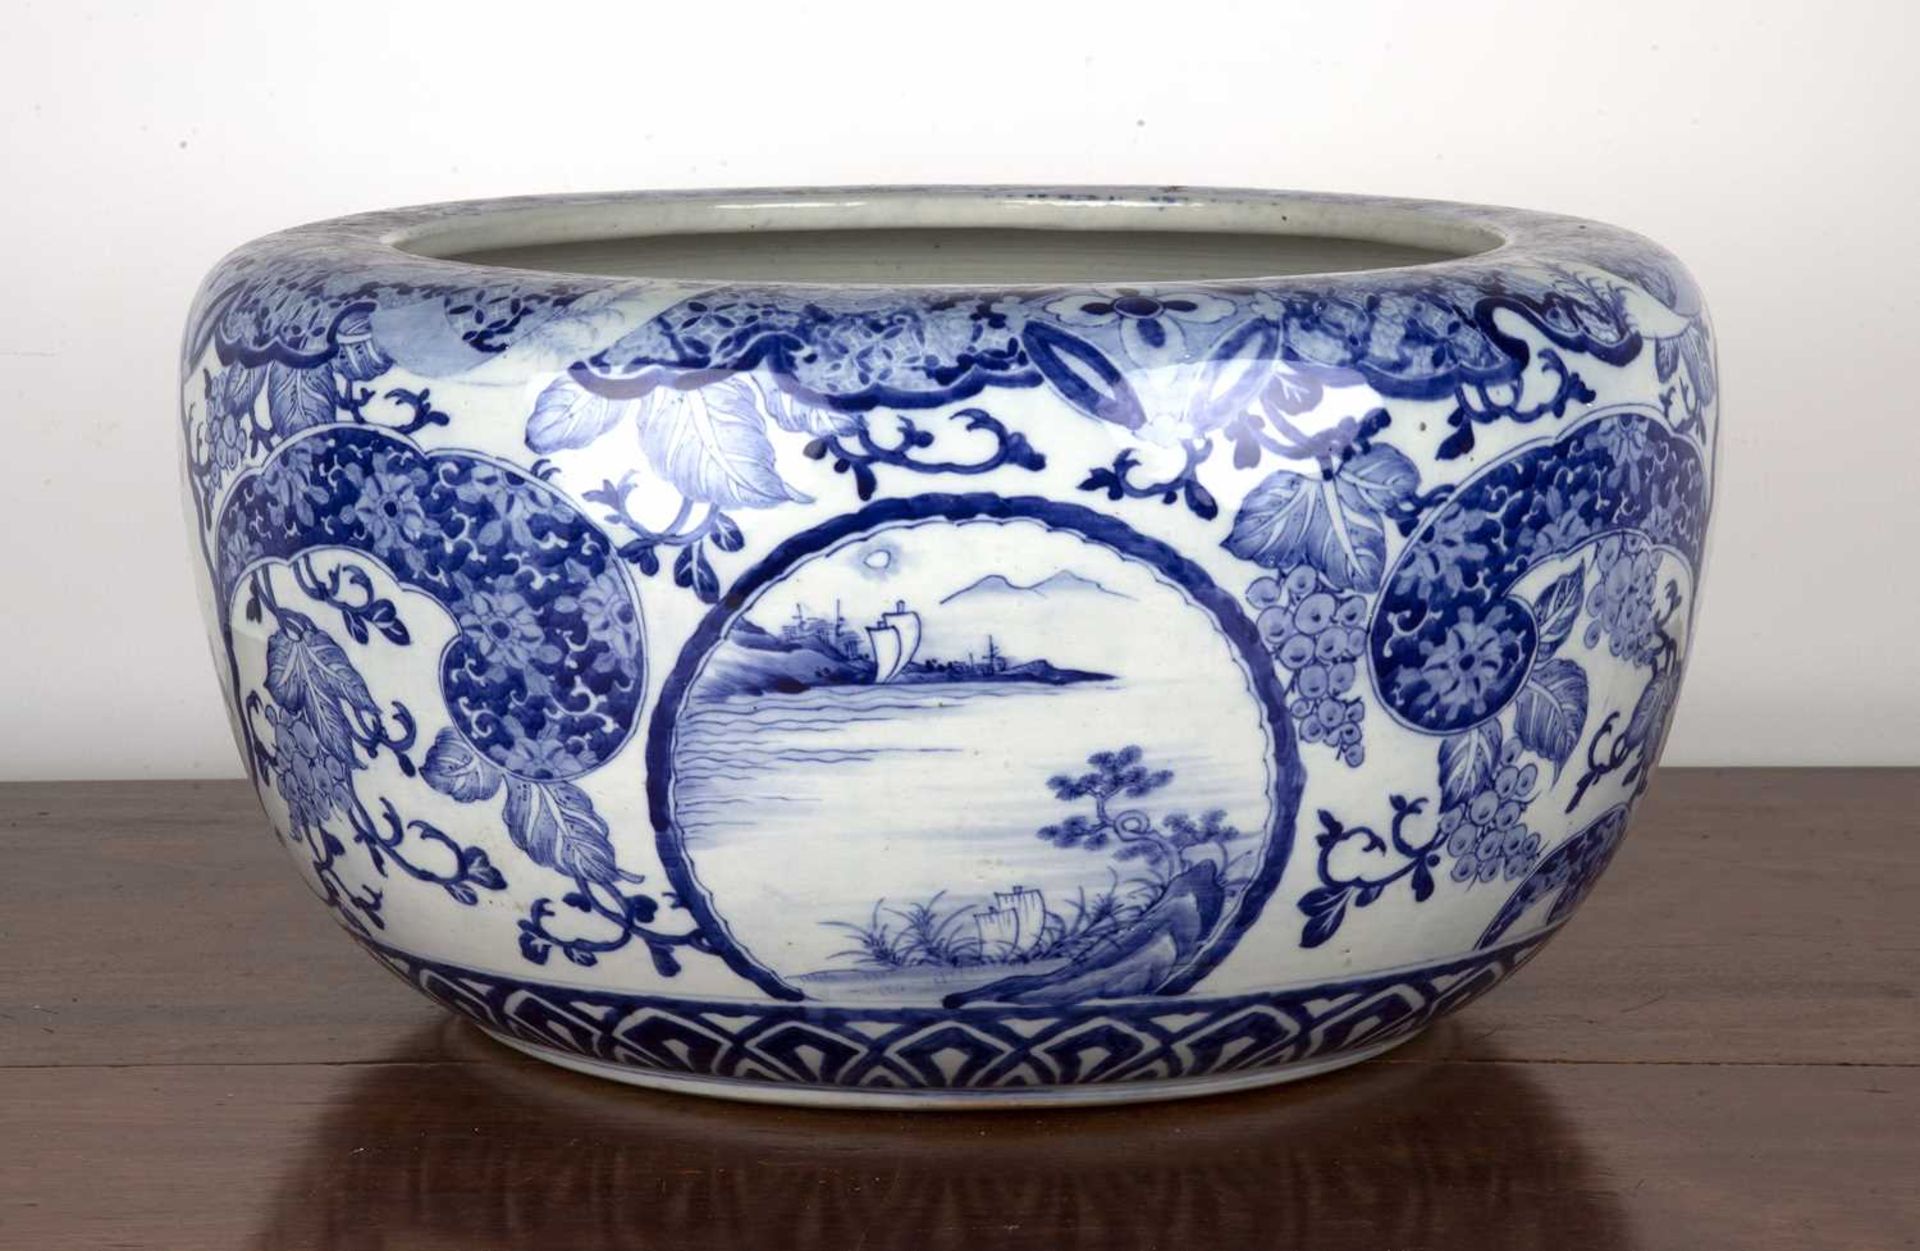 Japanese fish bowl or footbath Late 19th/early 20th Century, ceramic, with blue and white floral - Bild 2 aus 4